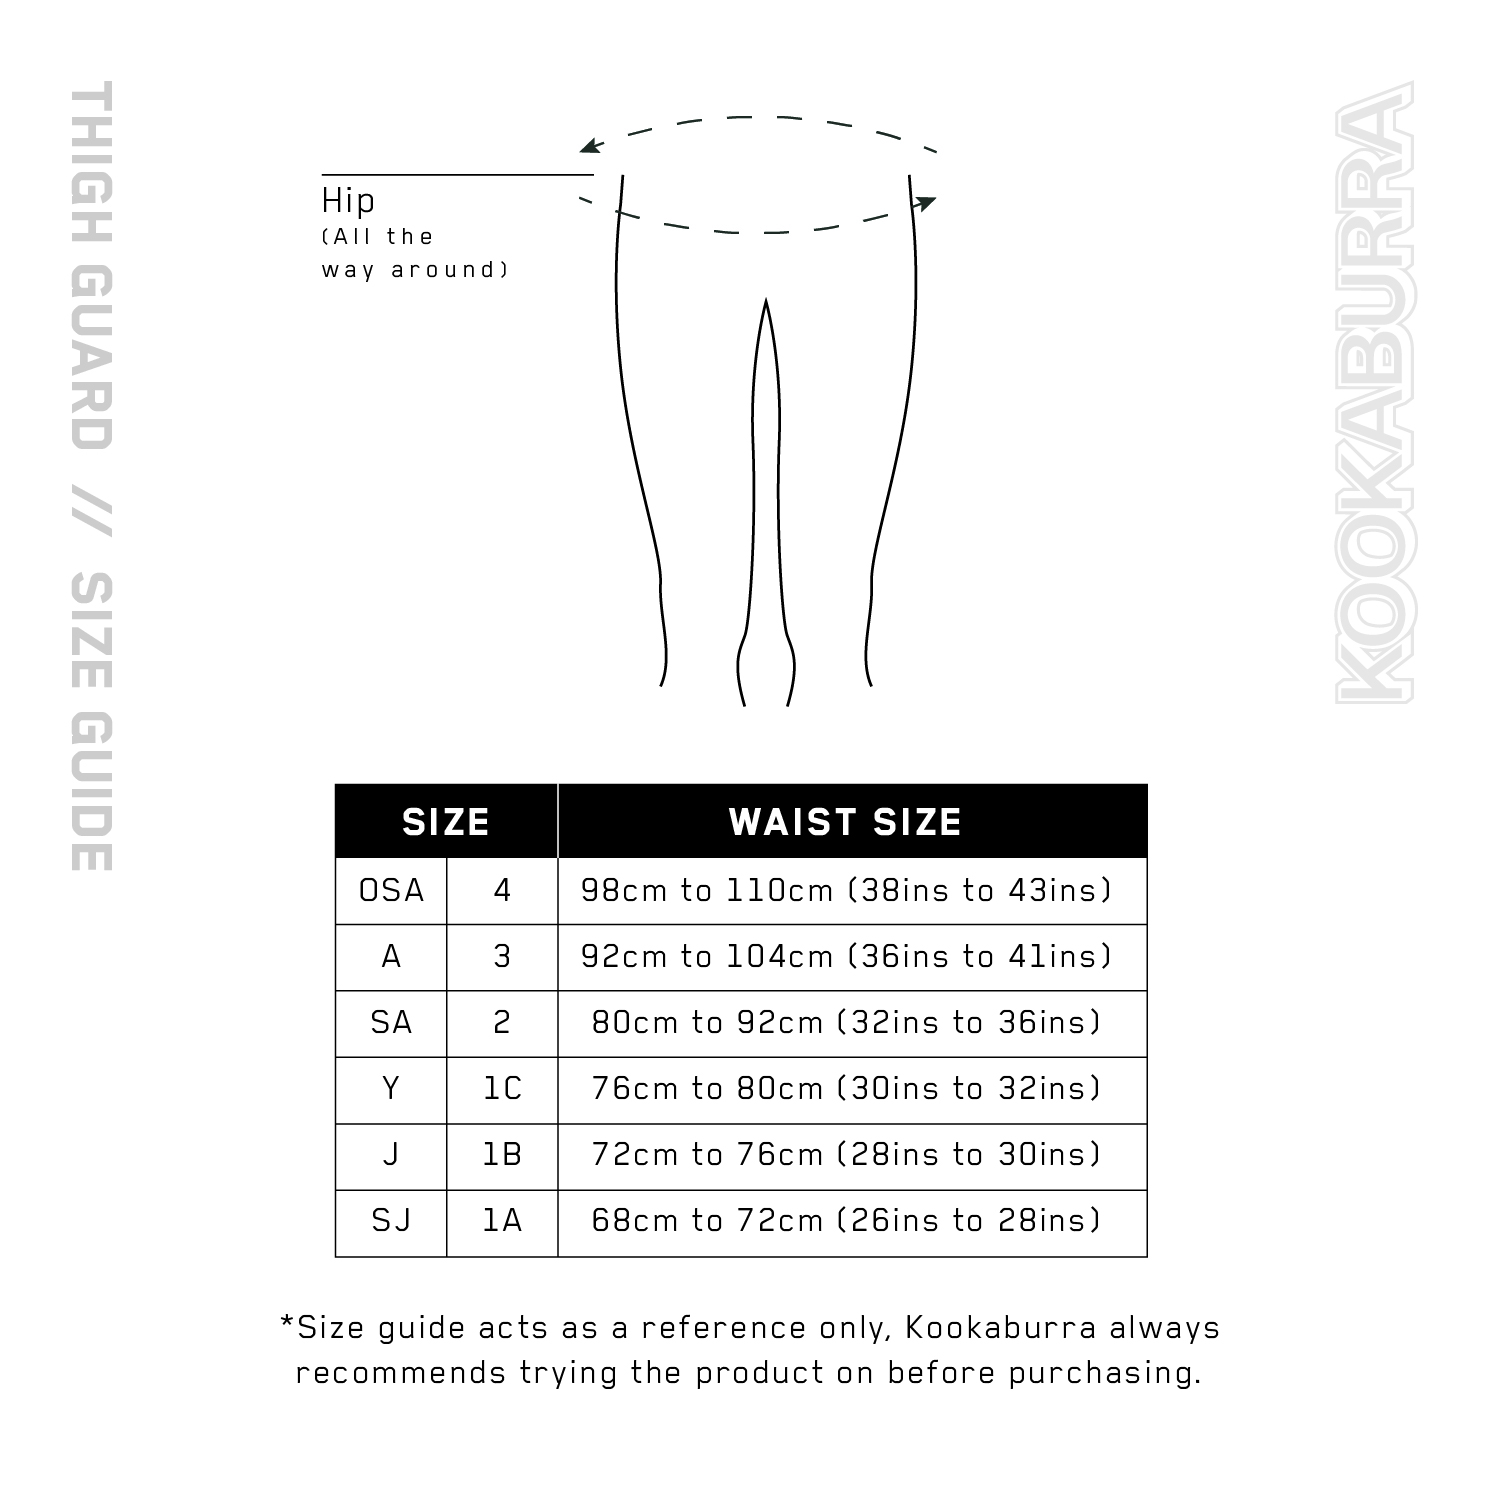 Cricket Thigh Guard Size Guide